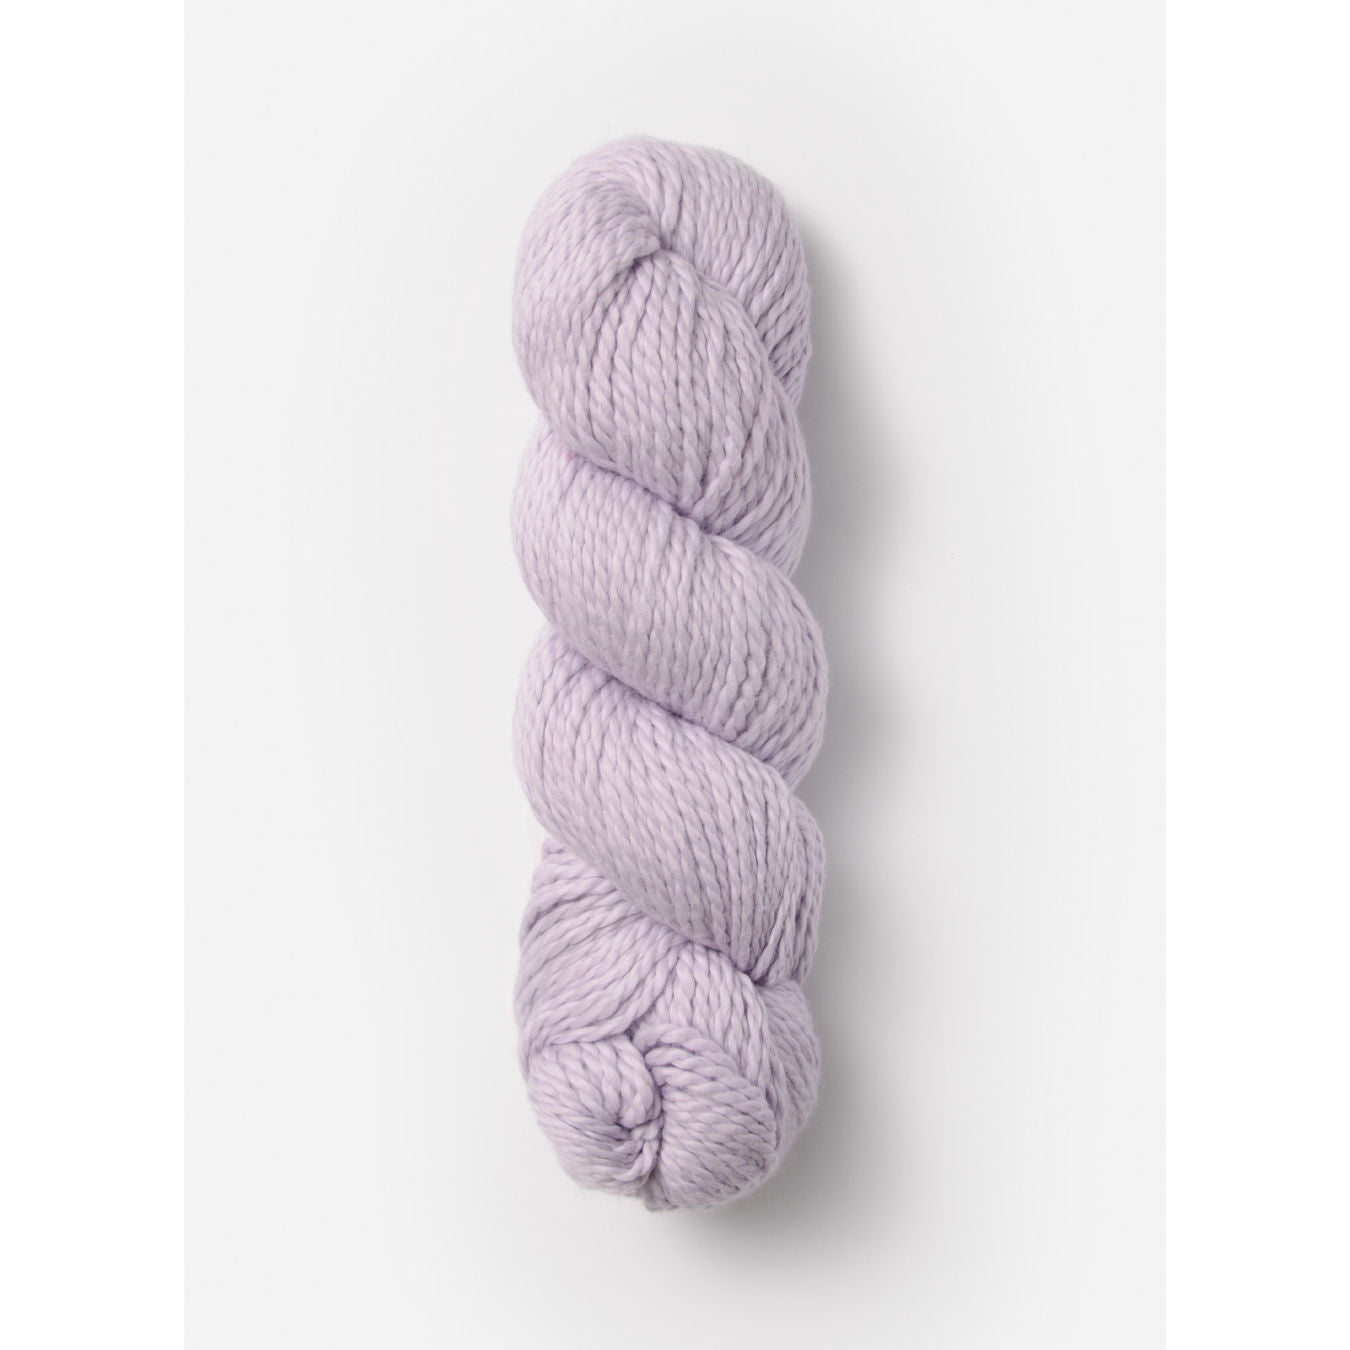 Blue Sky Fibers organic cotton worsted yarn in lavender